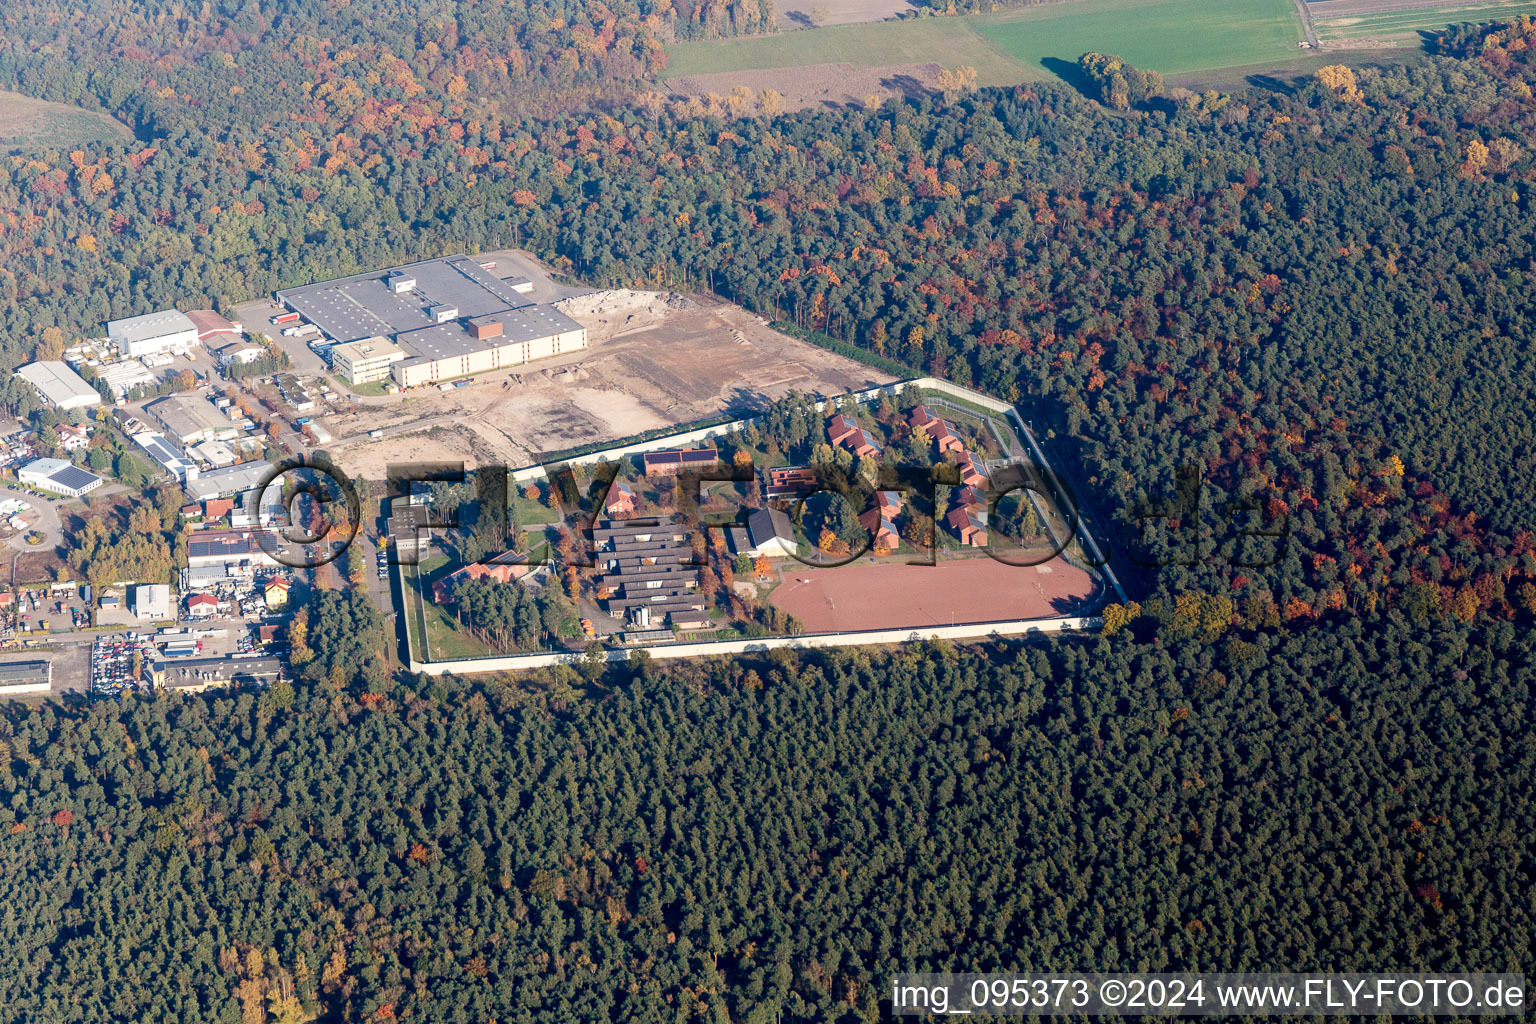 Aerial view of Prison grounds and high security fence Prison Jugendstrafanstalt Schifferstadt in Schifferstadt in the state Rhineland-Palatinate, Germany